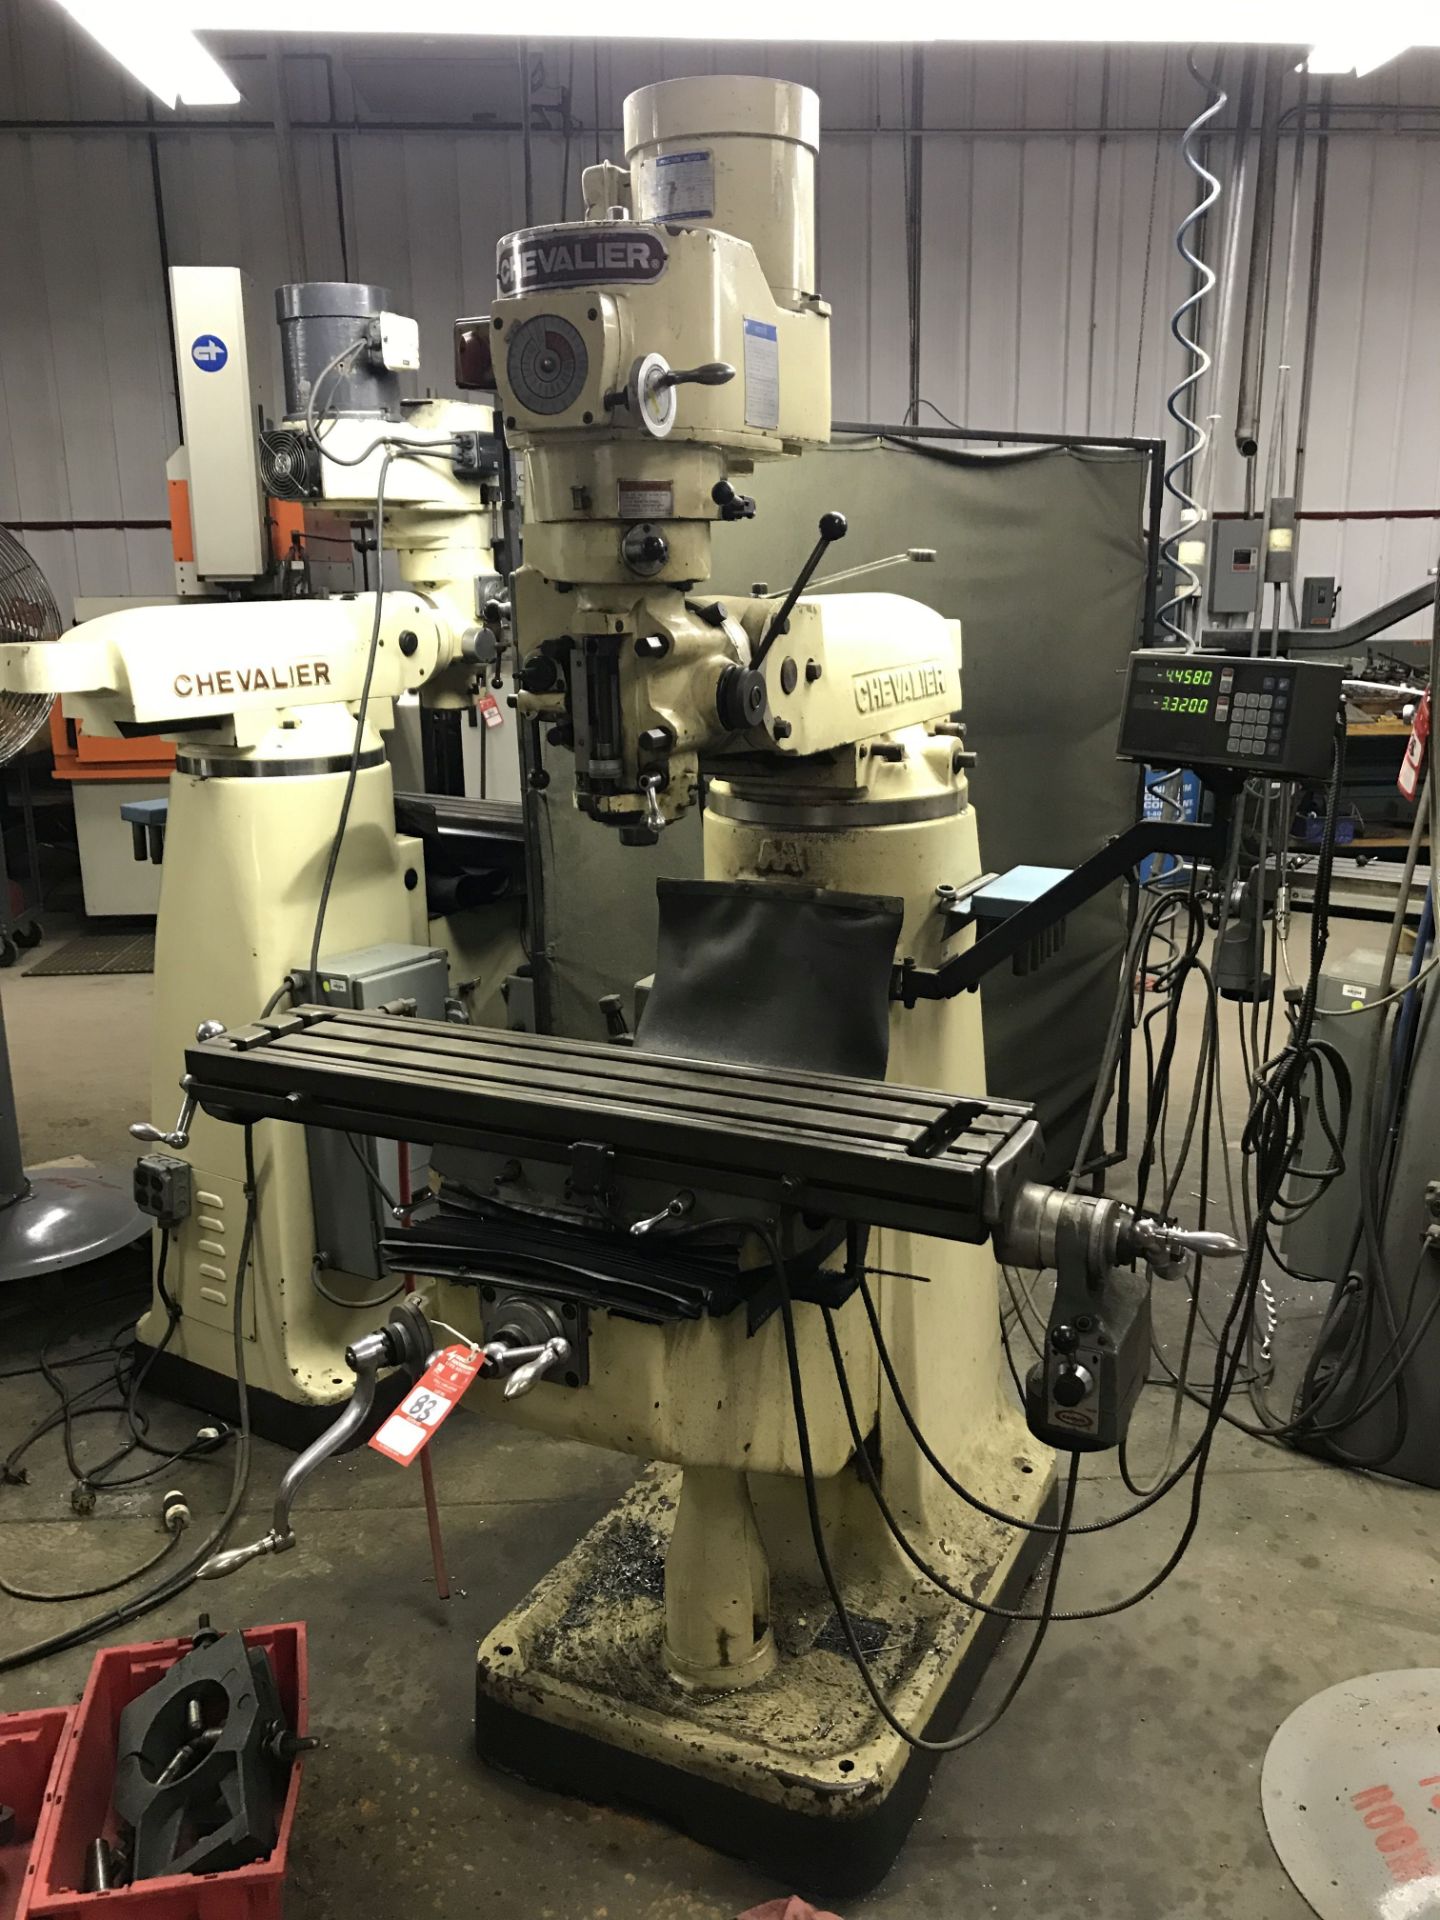 CHEVALIER FM-3VS VERTICAL MILLING MACHINE, 9'' x 42'' POWER FEED TABLE, 60-4500 SPINDLE SPEEDS, SONY